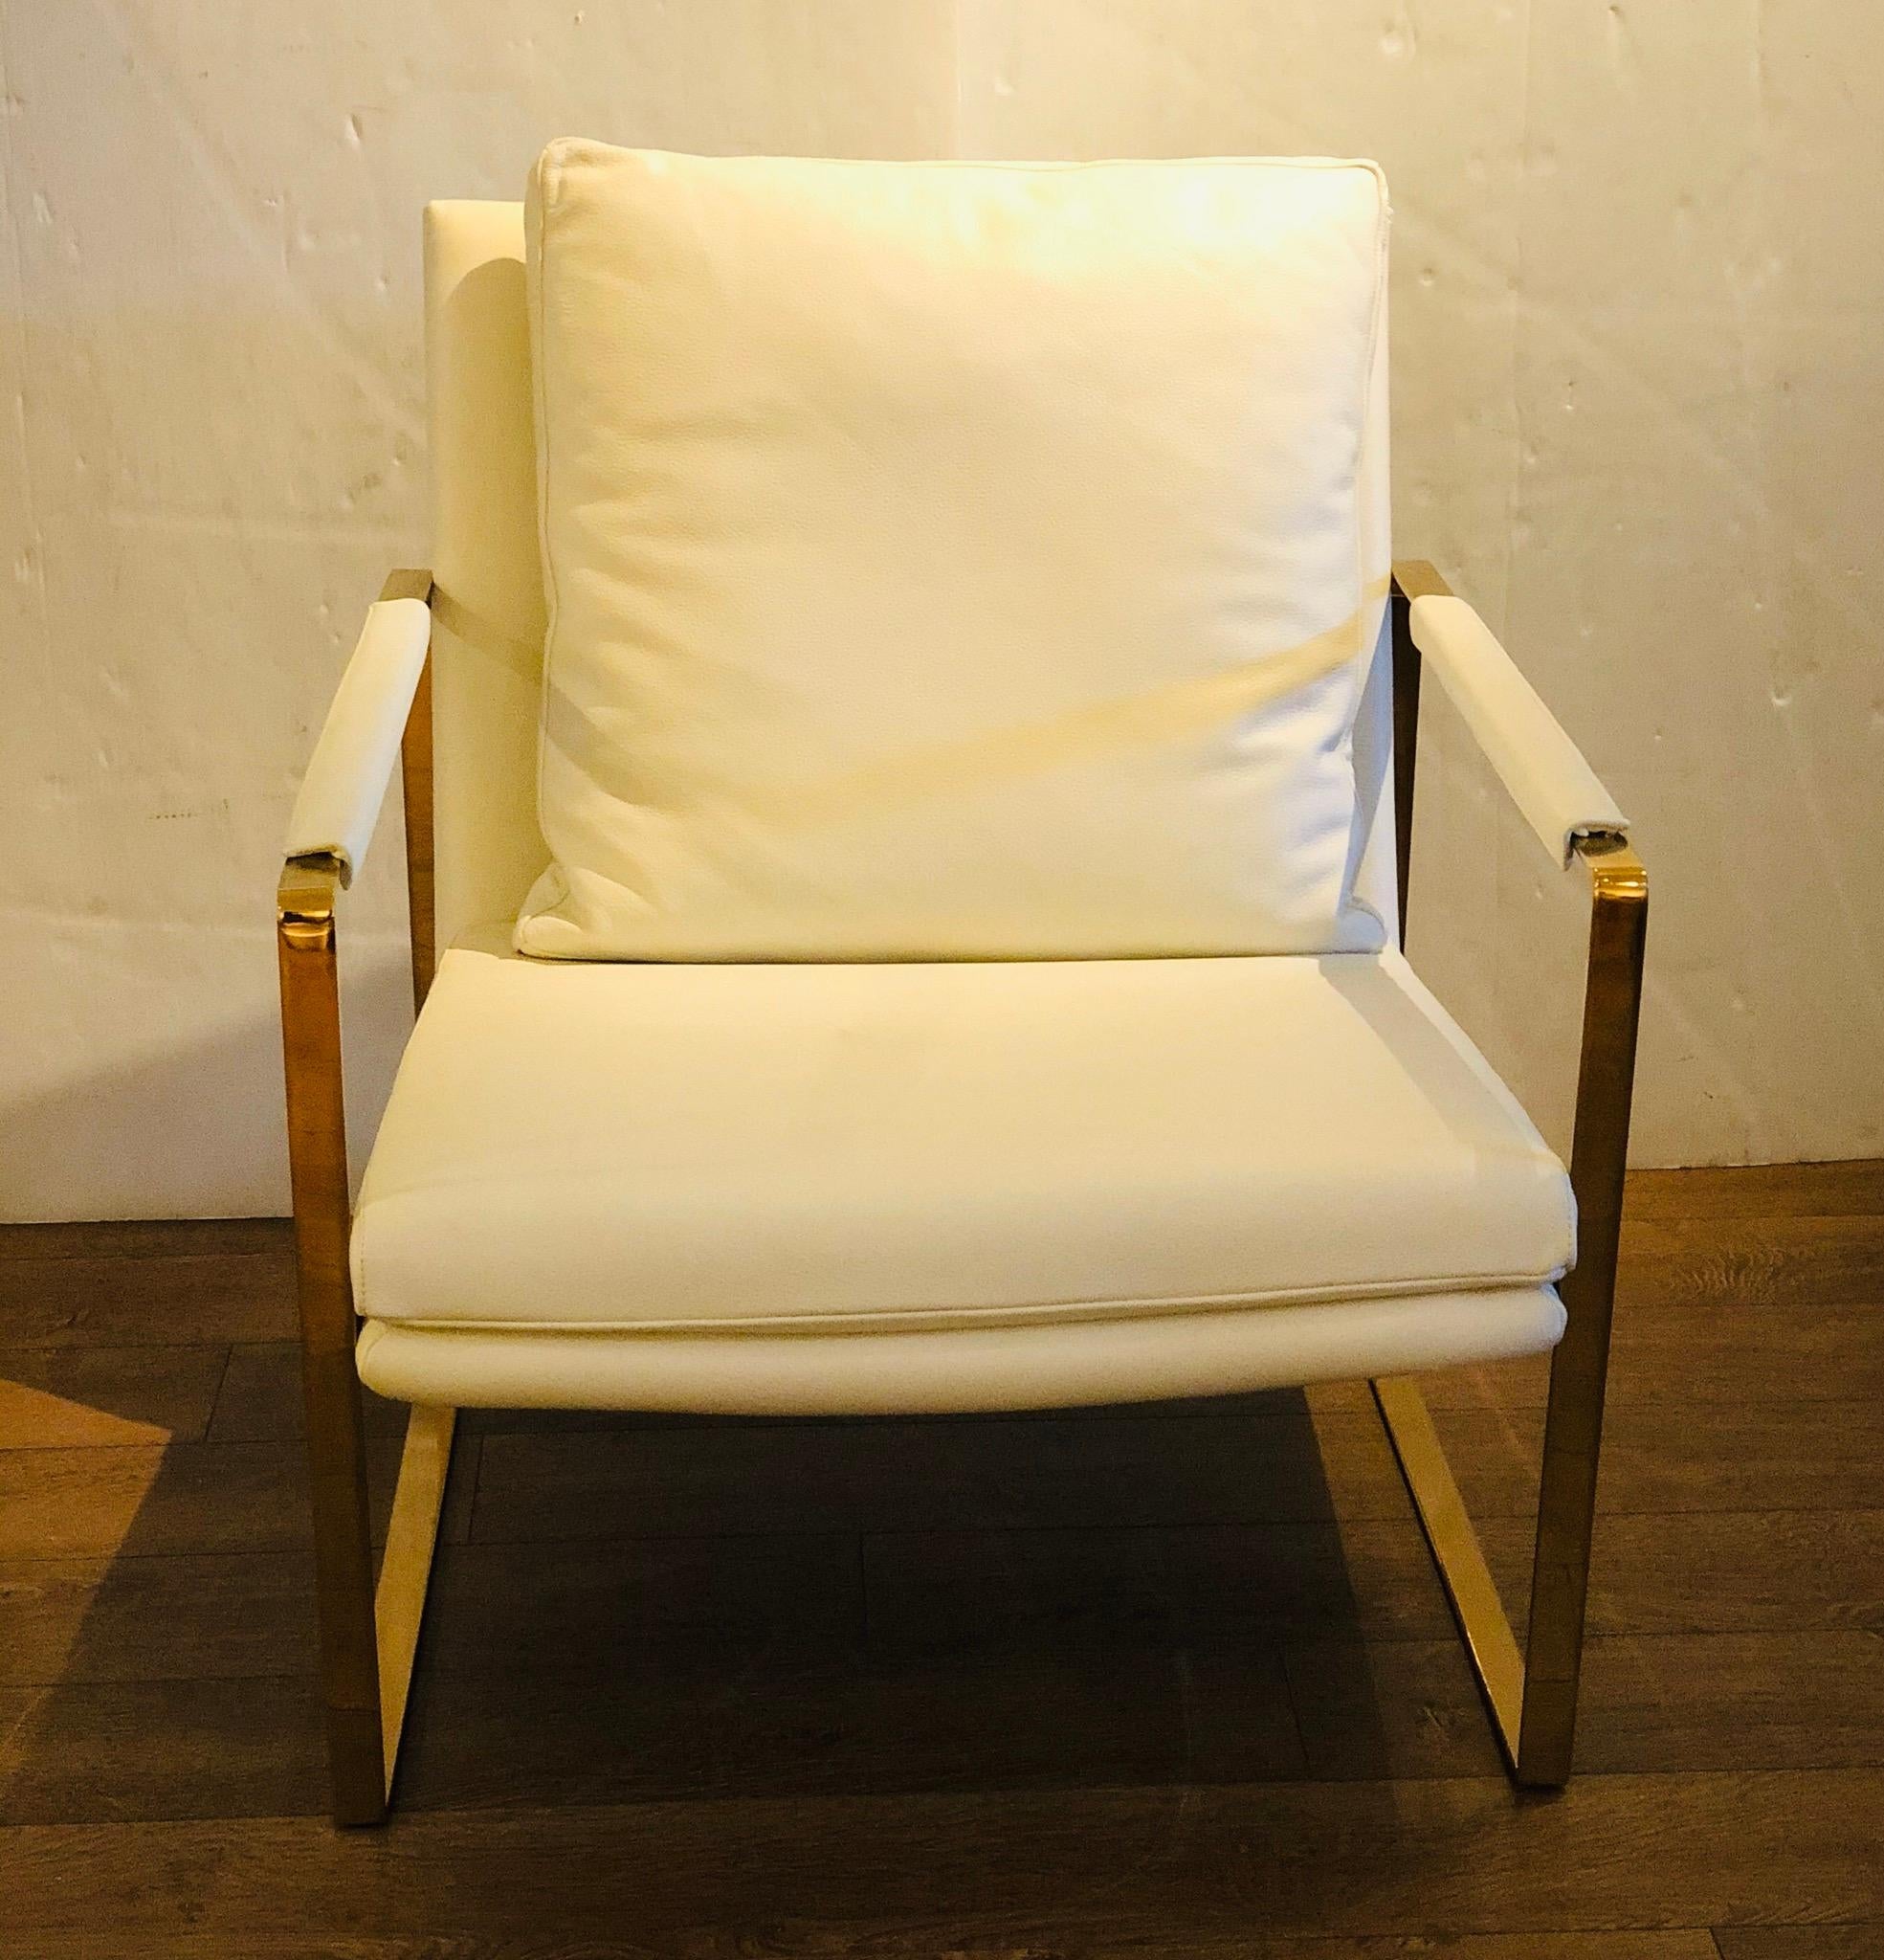 American Contemporary Lounge Armchair in Leather and Brass-Plated Frame Steel